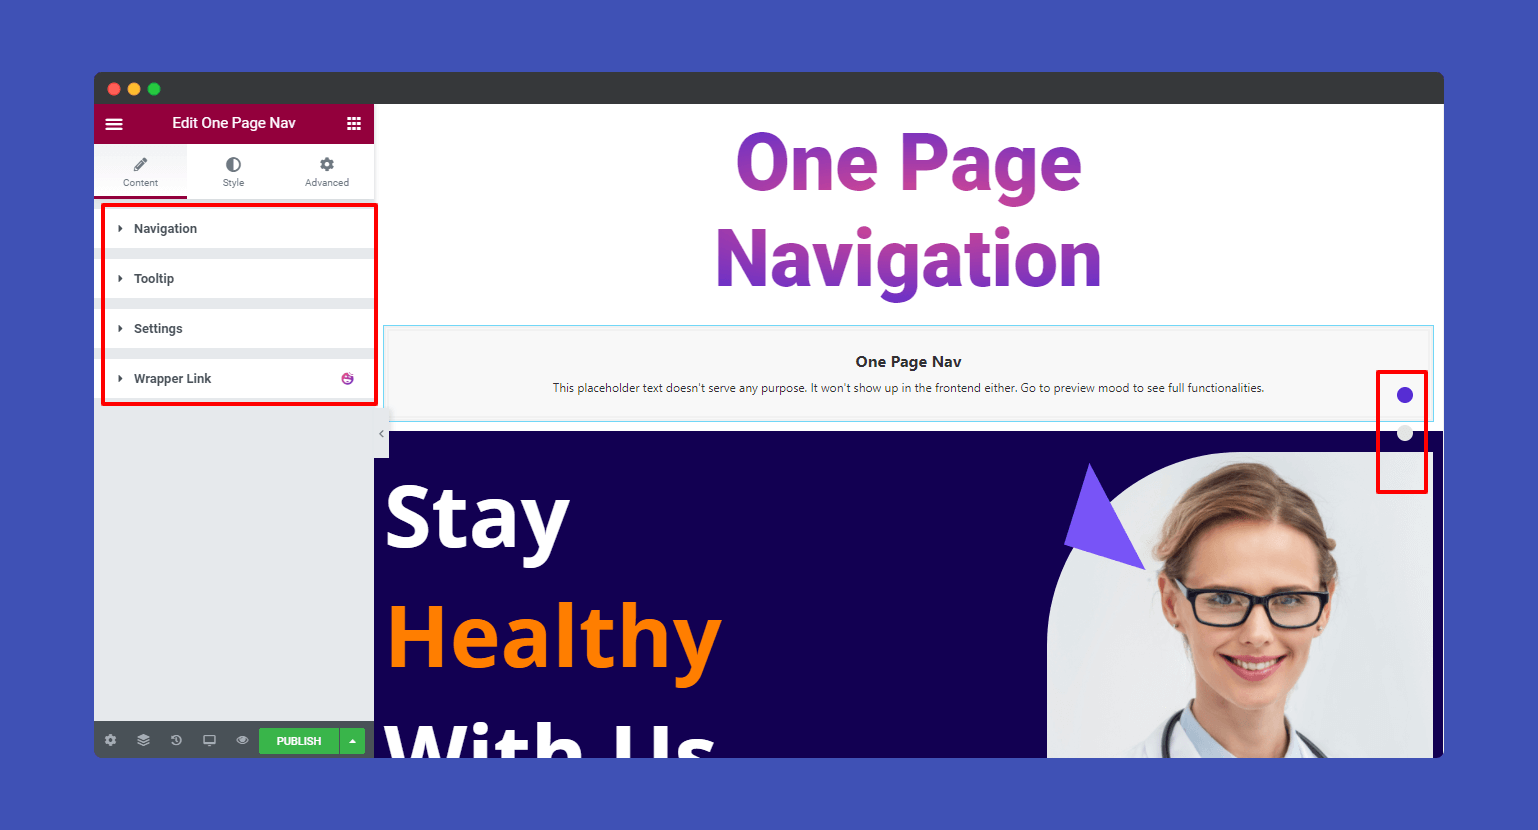 Content of one page navigation